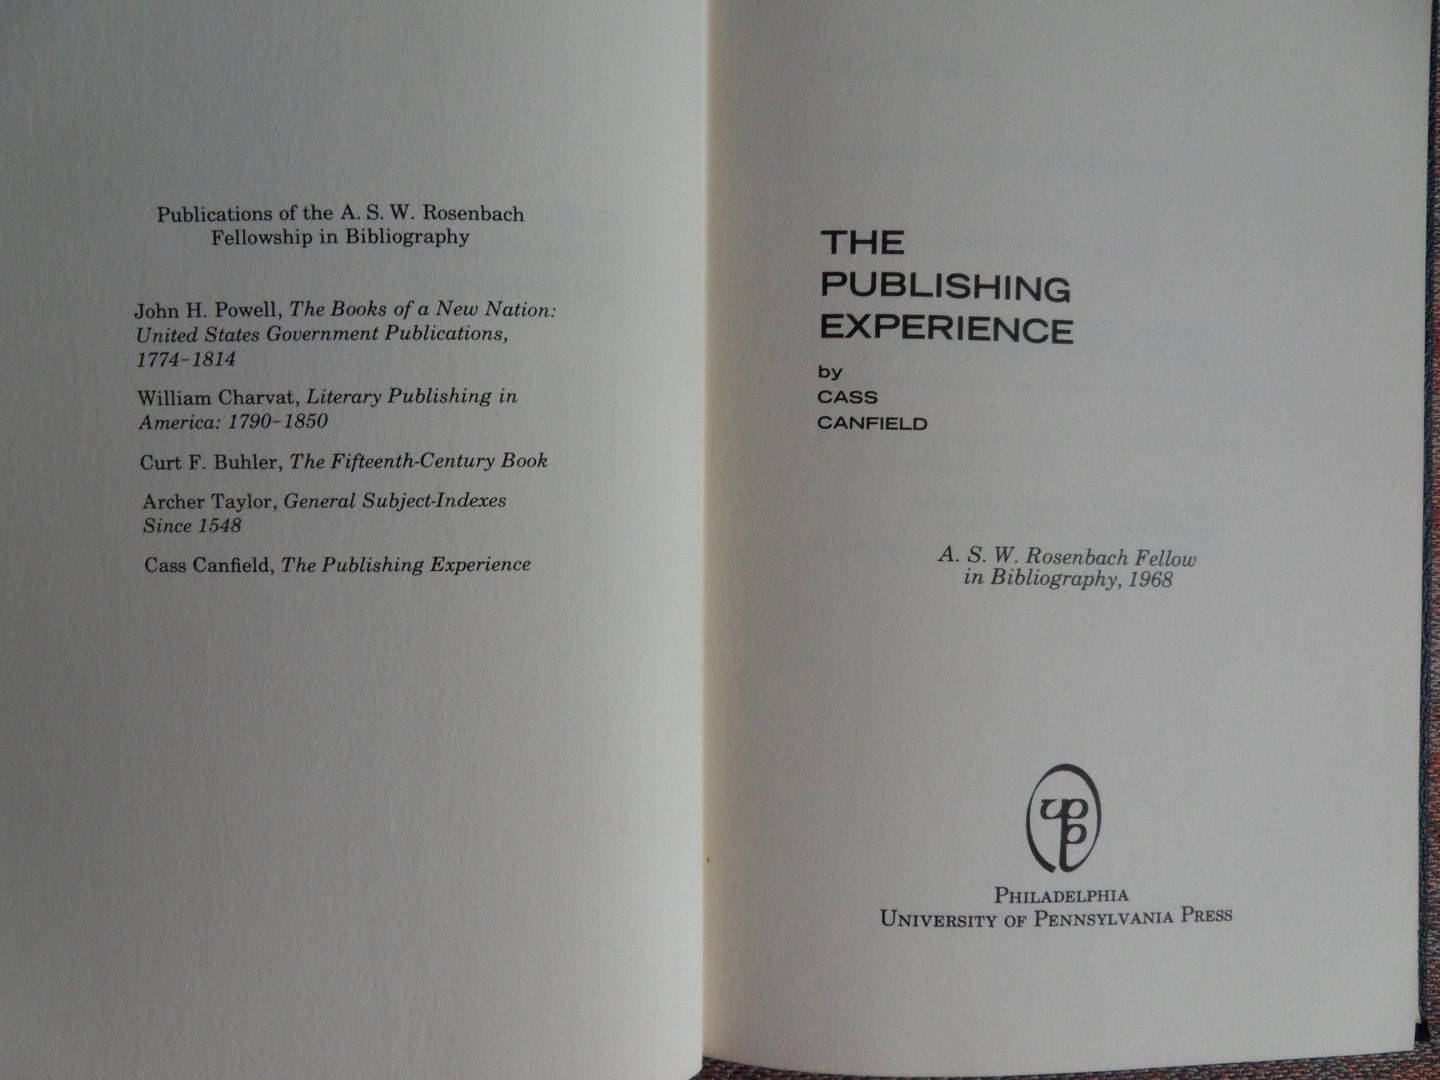 Canfield, Cass. - The Publishing Experience. - from the A.S.W. Rosenbach Fellow in Bibliography, 1968.